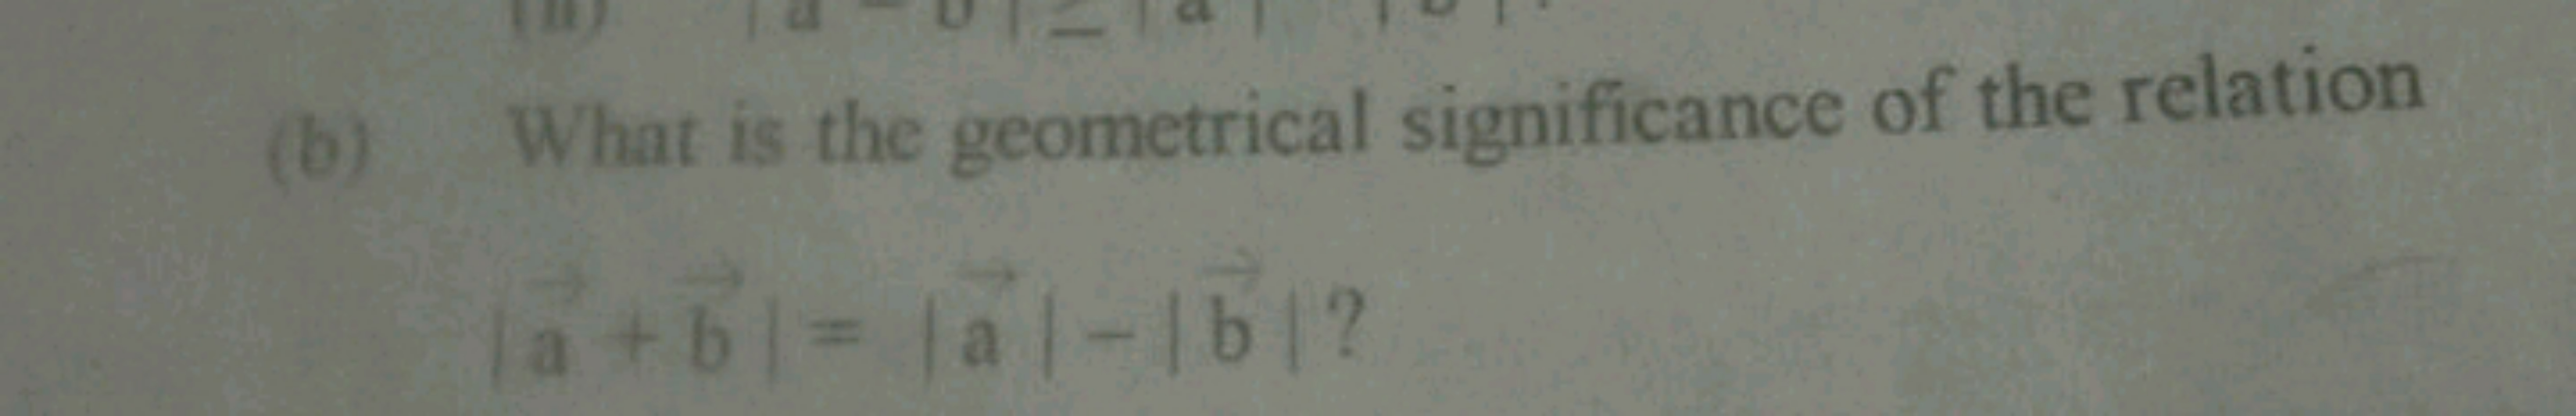 (b) What is the geometrical significance of the relation
∣a+b∣=∣a∣−∣b∣